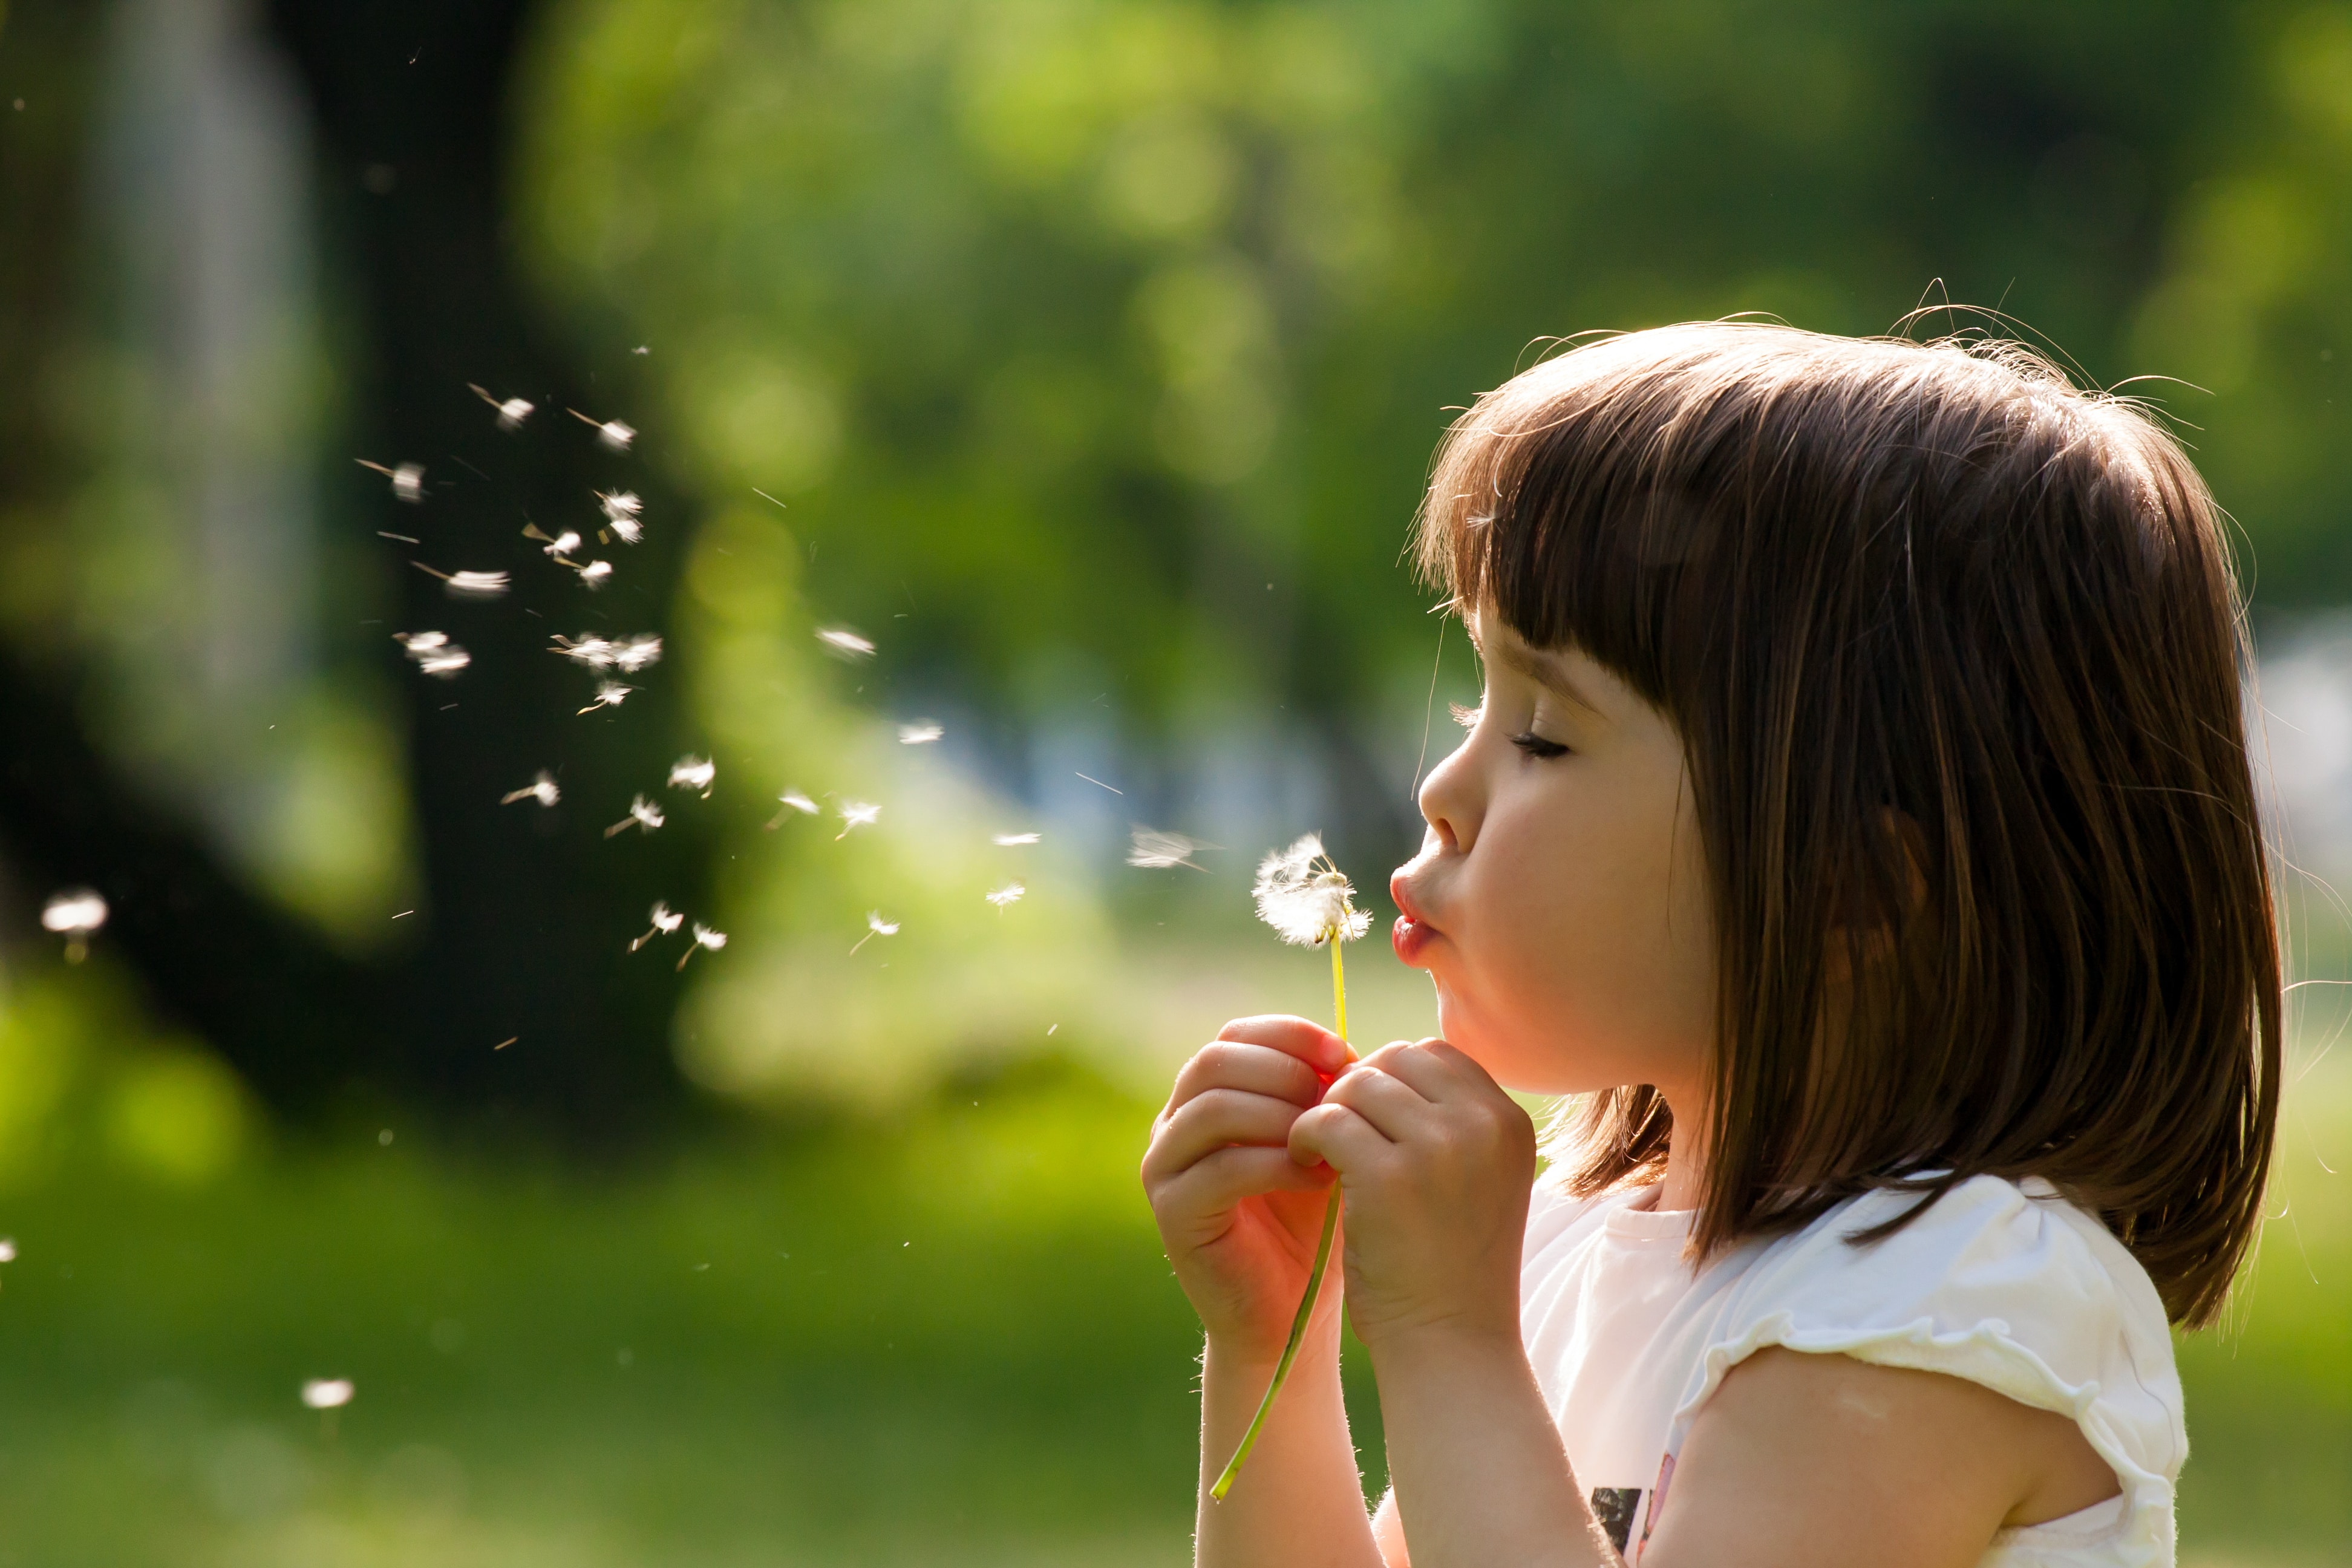 5 natural hay fever remedies, so you can still enjoy the summer